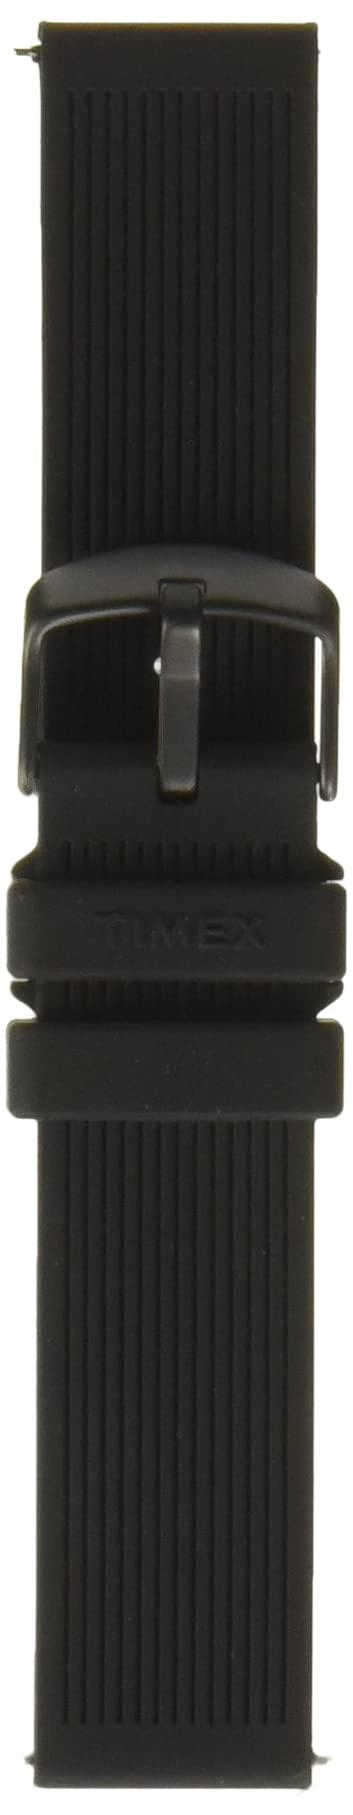 Timex 20mm Quick-Release Strap